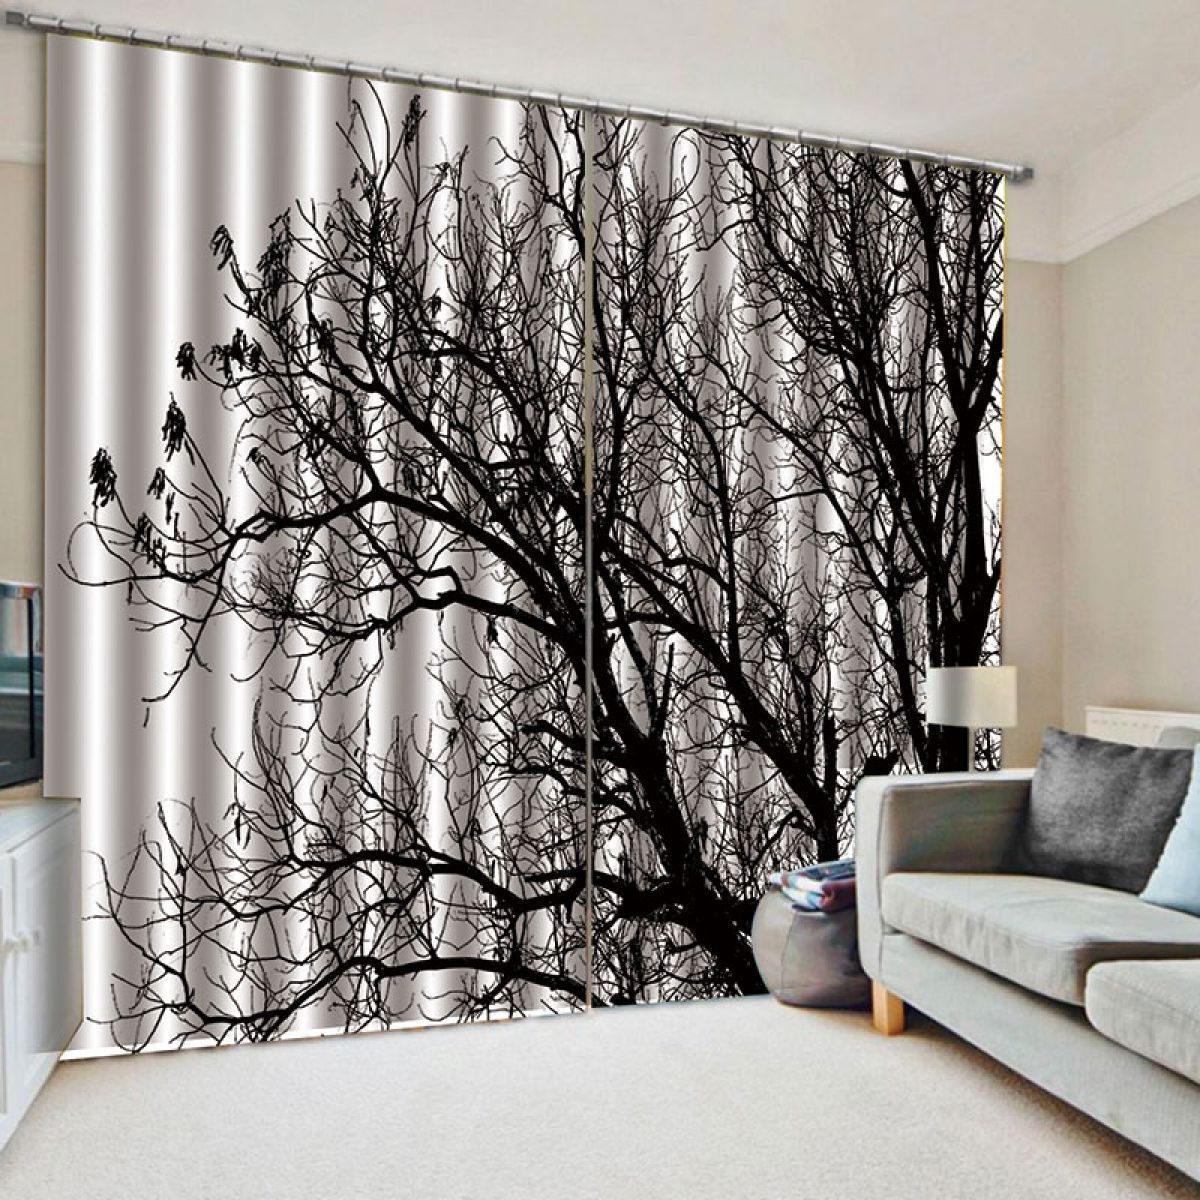 3d Tree Black And White Art Printed Window Curtain Home Decor